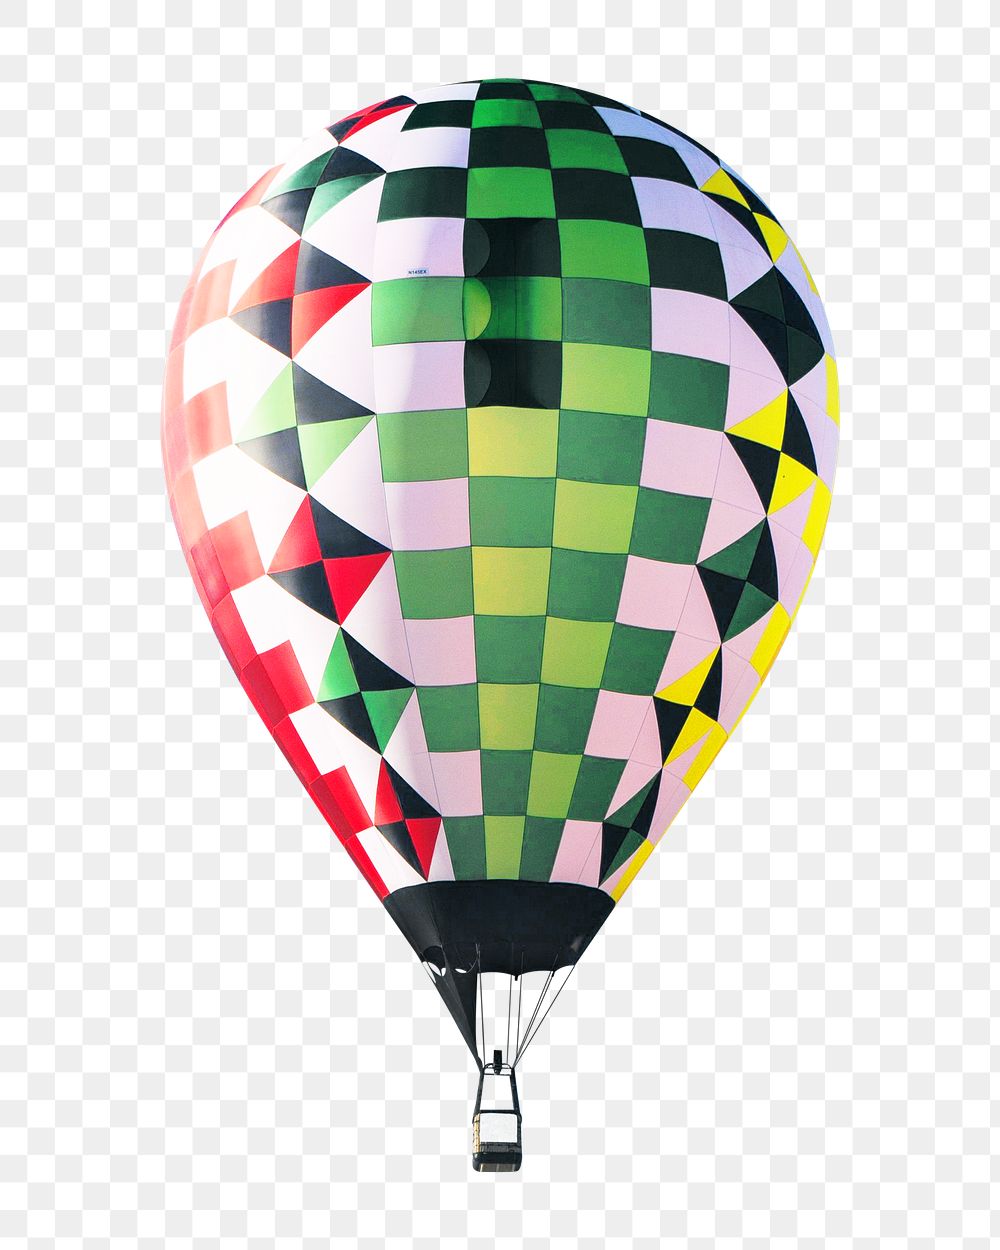 Touring air balloon png, transparent background